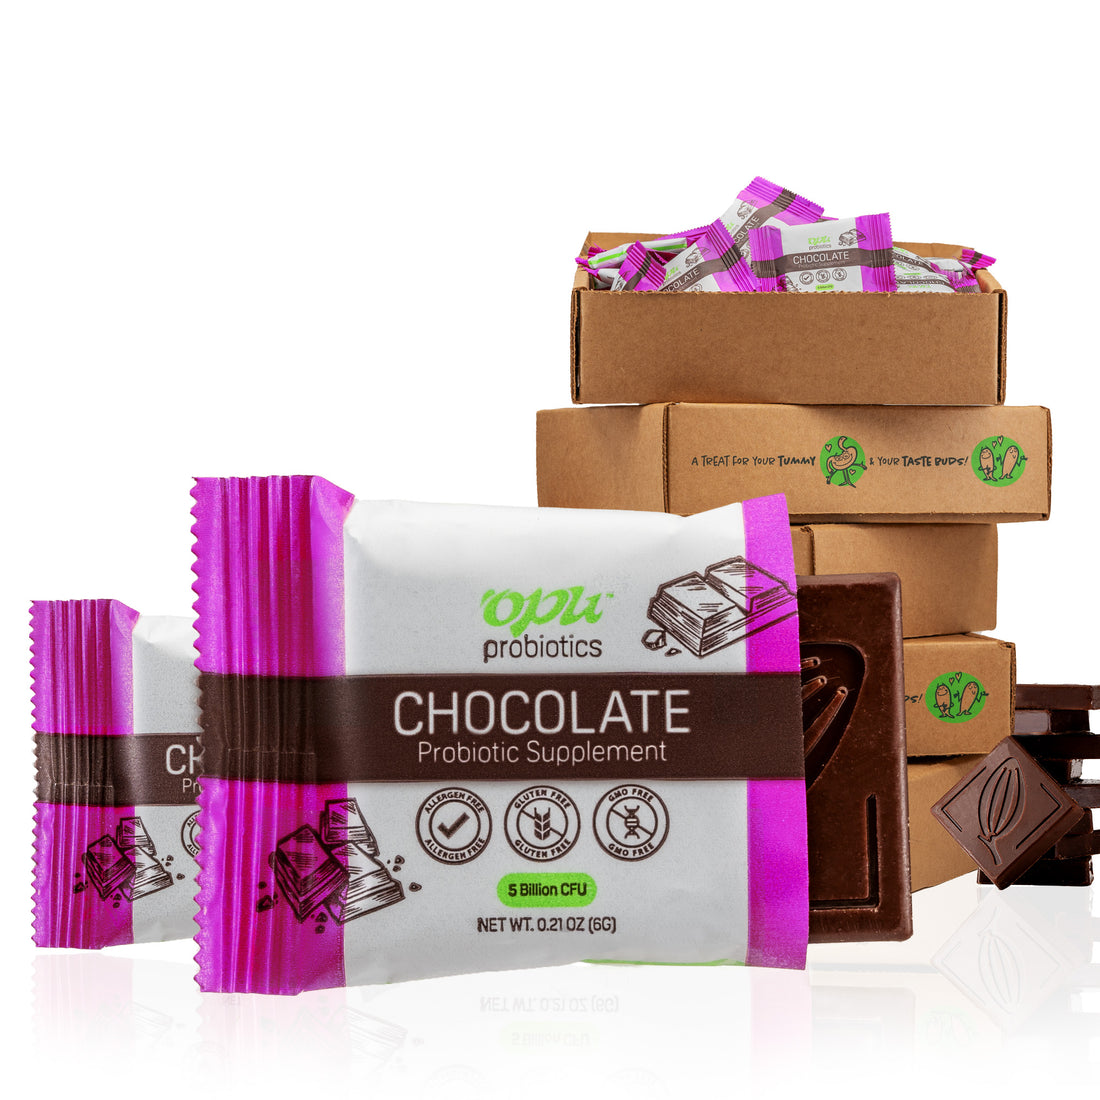 FLASH SALE! LIMITED QUANTITIES! Opu Probiotics Chocolate Supplements! 30 Day Supply